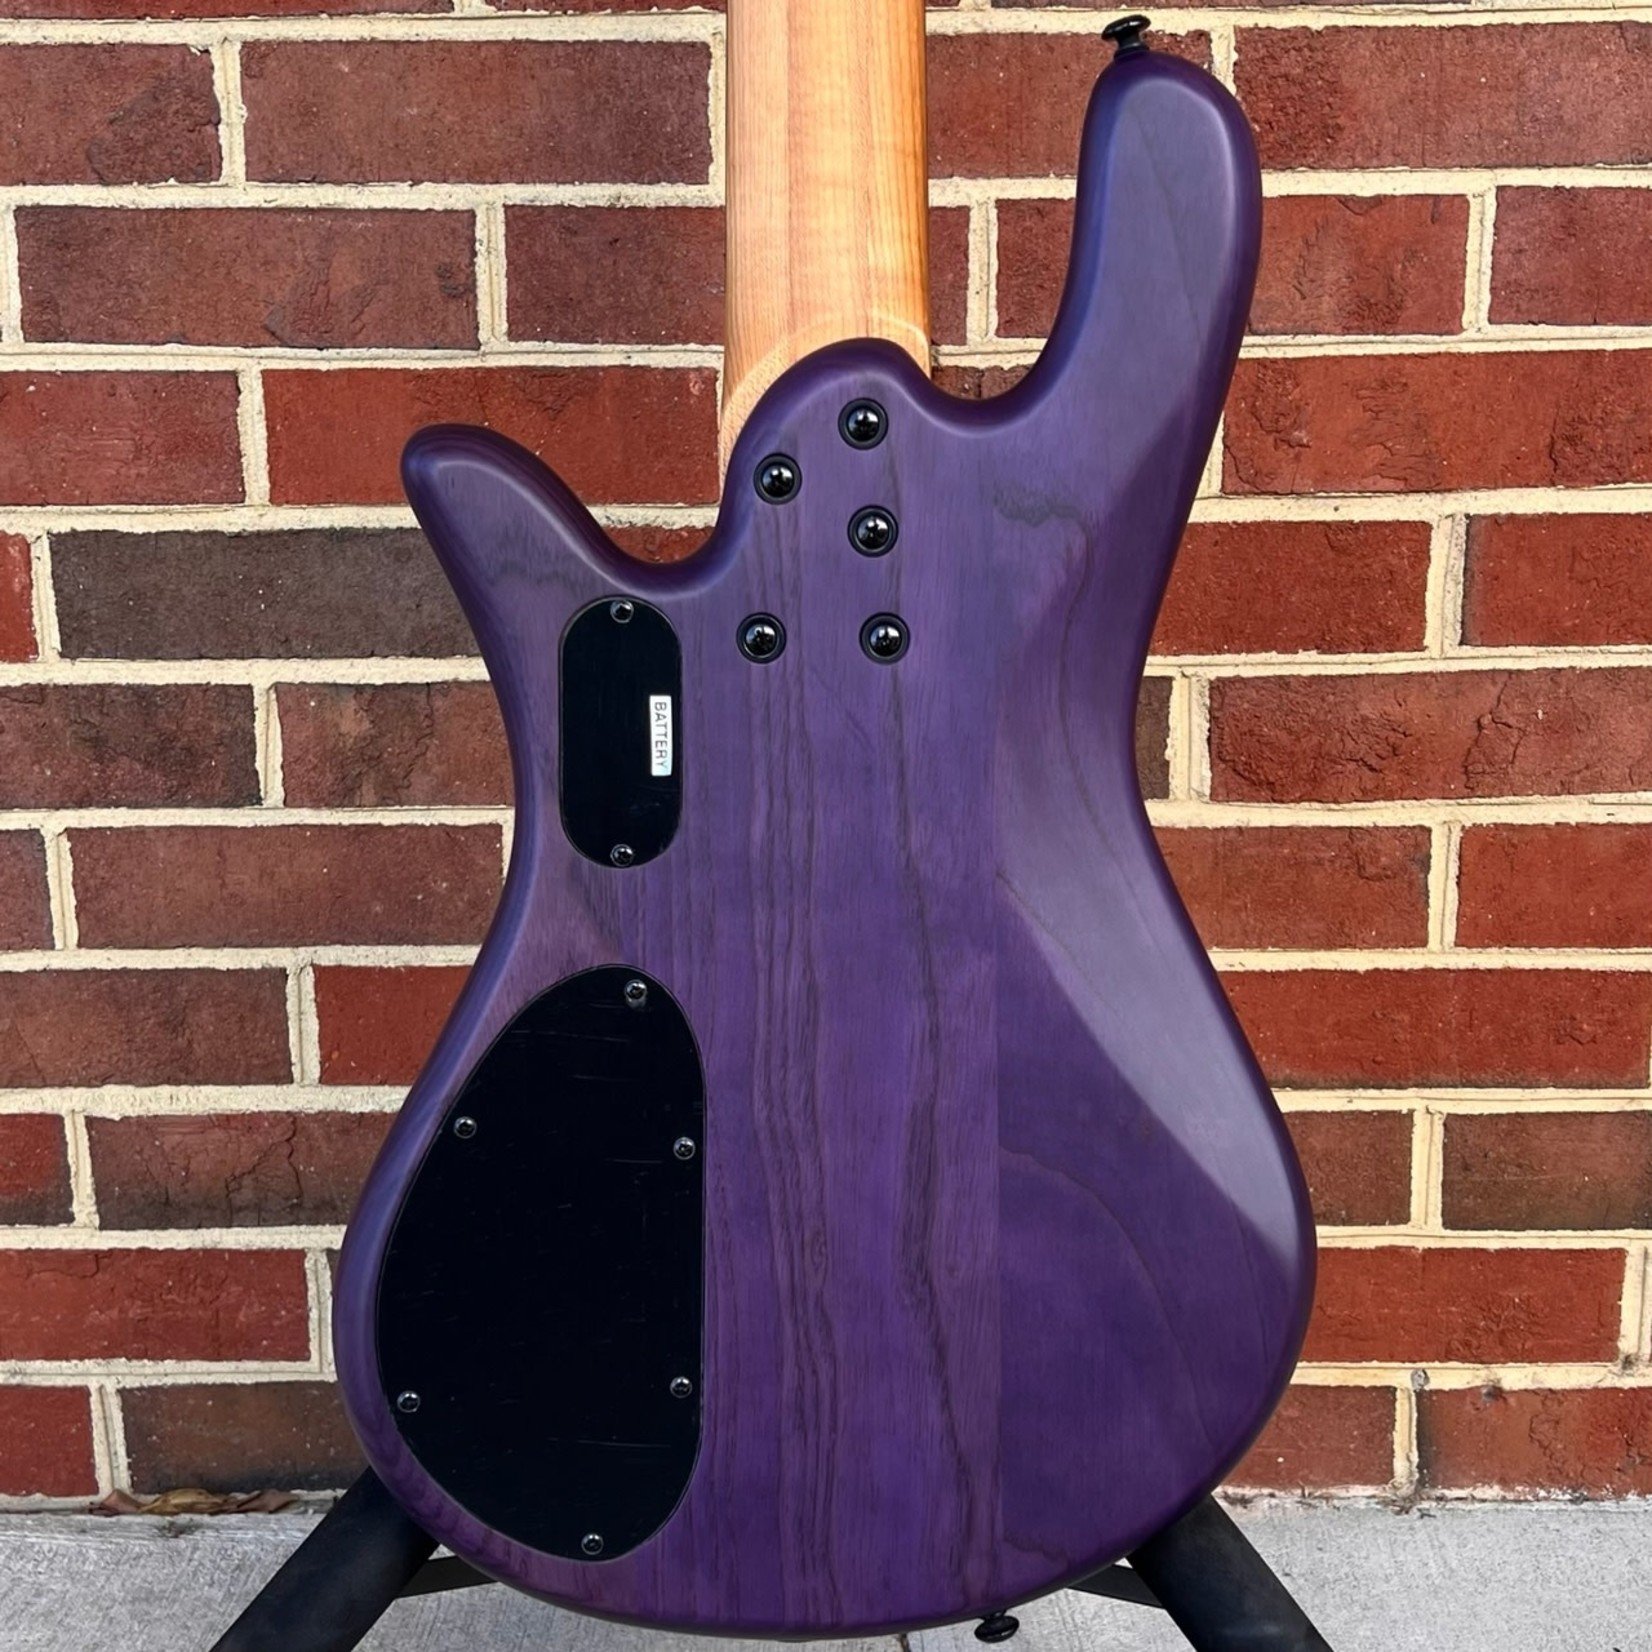 Spector Spector NS Pulse II 5-String, Ultra Violet Matte, Quilted Maple Top, Swamp Ash Body, Roasted Maple Neck, Macassar Ebony Fretboard, SN# W211883